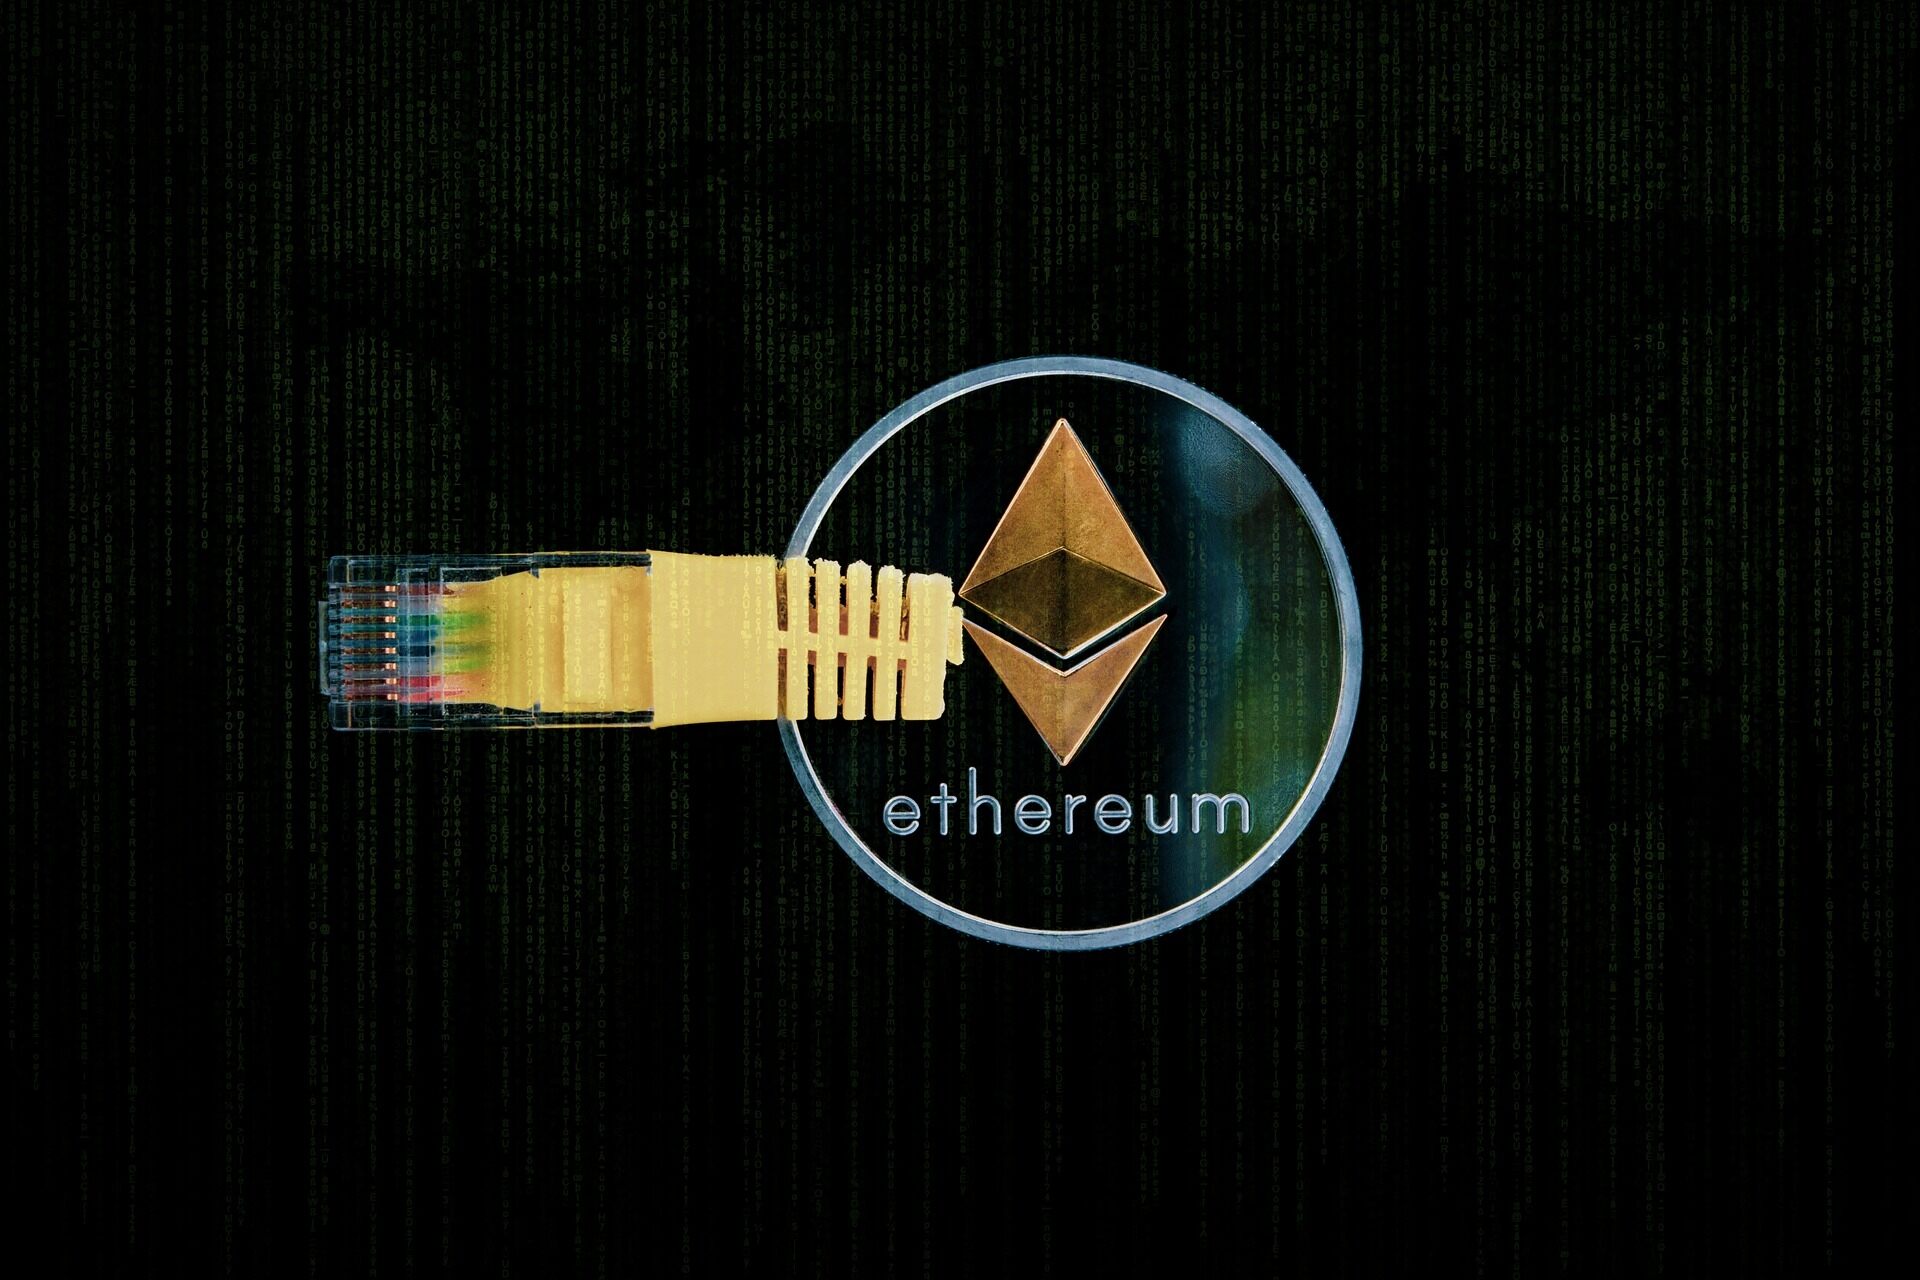 ETF: Some institutions may redirect ETF (Exchange-Traded Fund) funds towards Ethereum (ETH), seeking higher returns